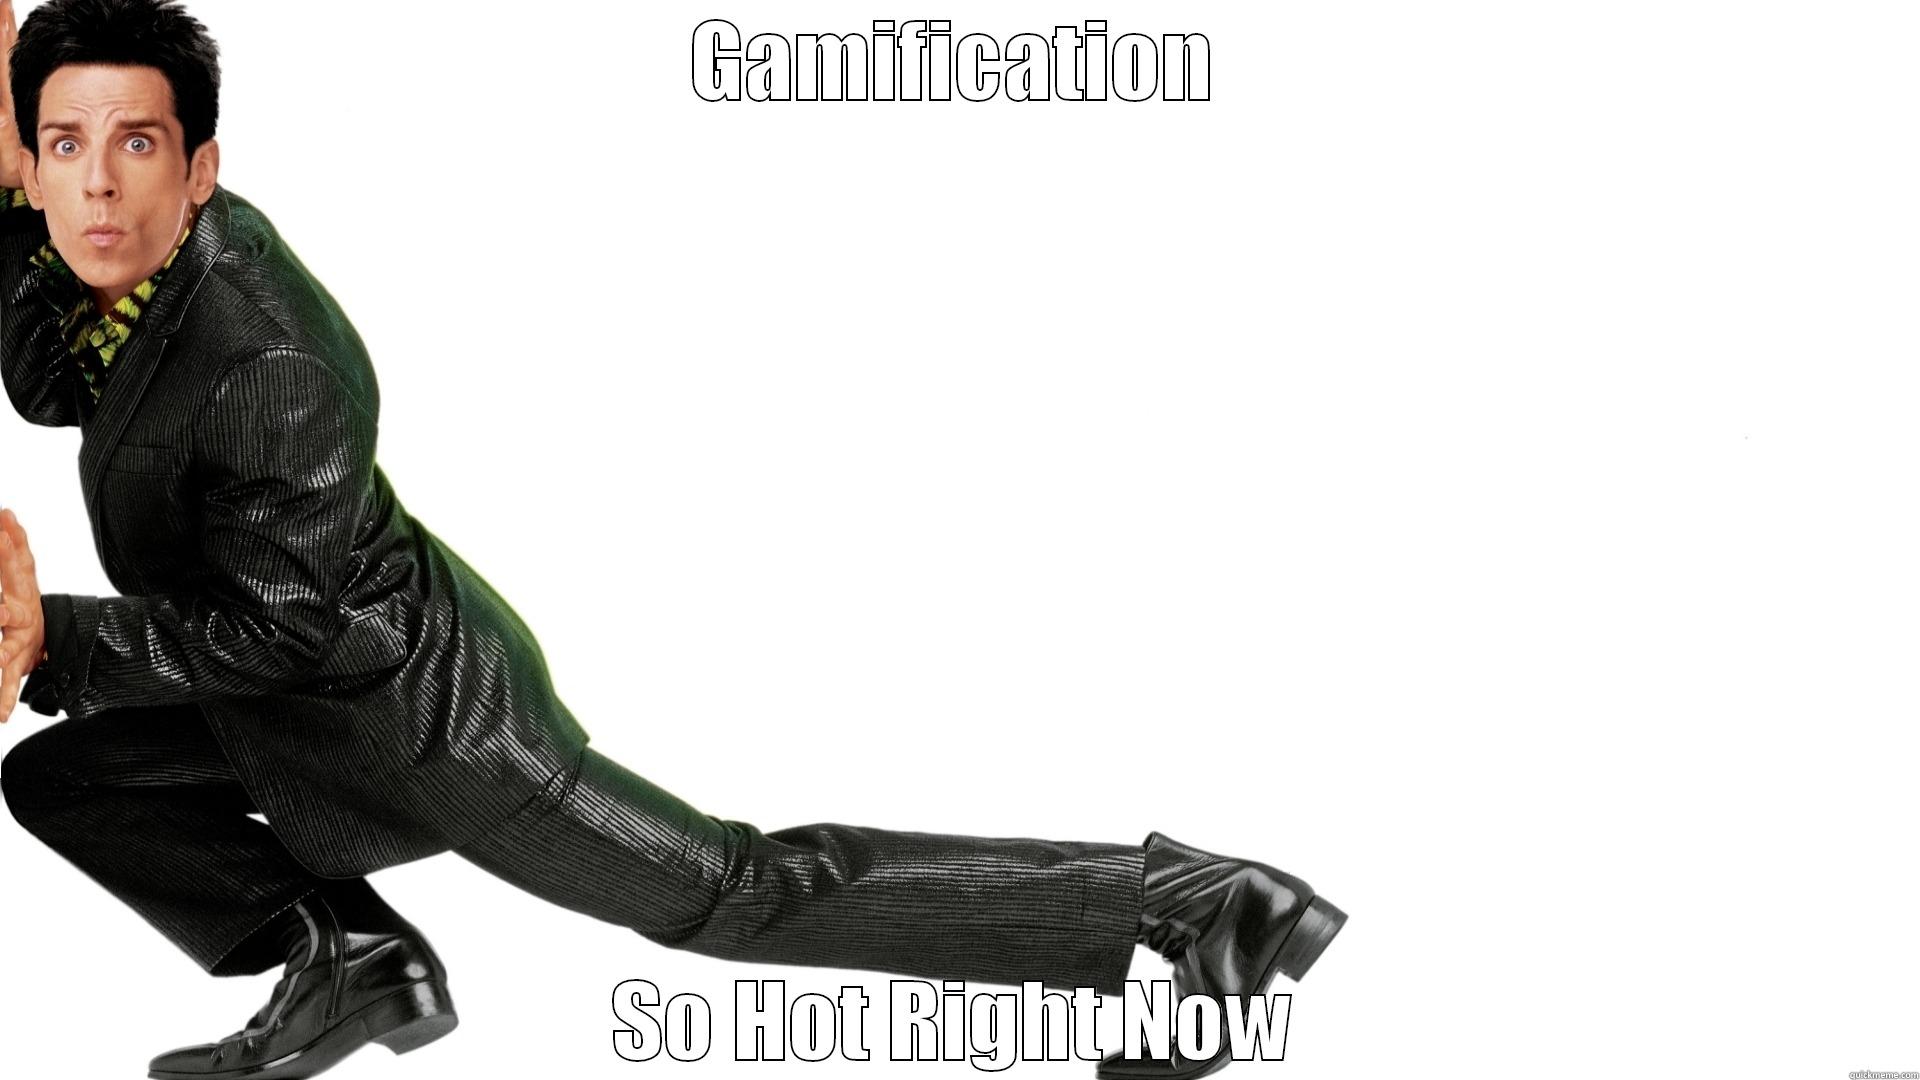 Zoolander Knows About Gamification - GAMIFICATION SO HOT RIGHT NOW Misc